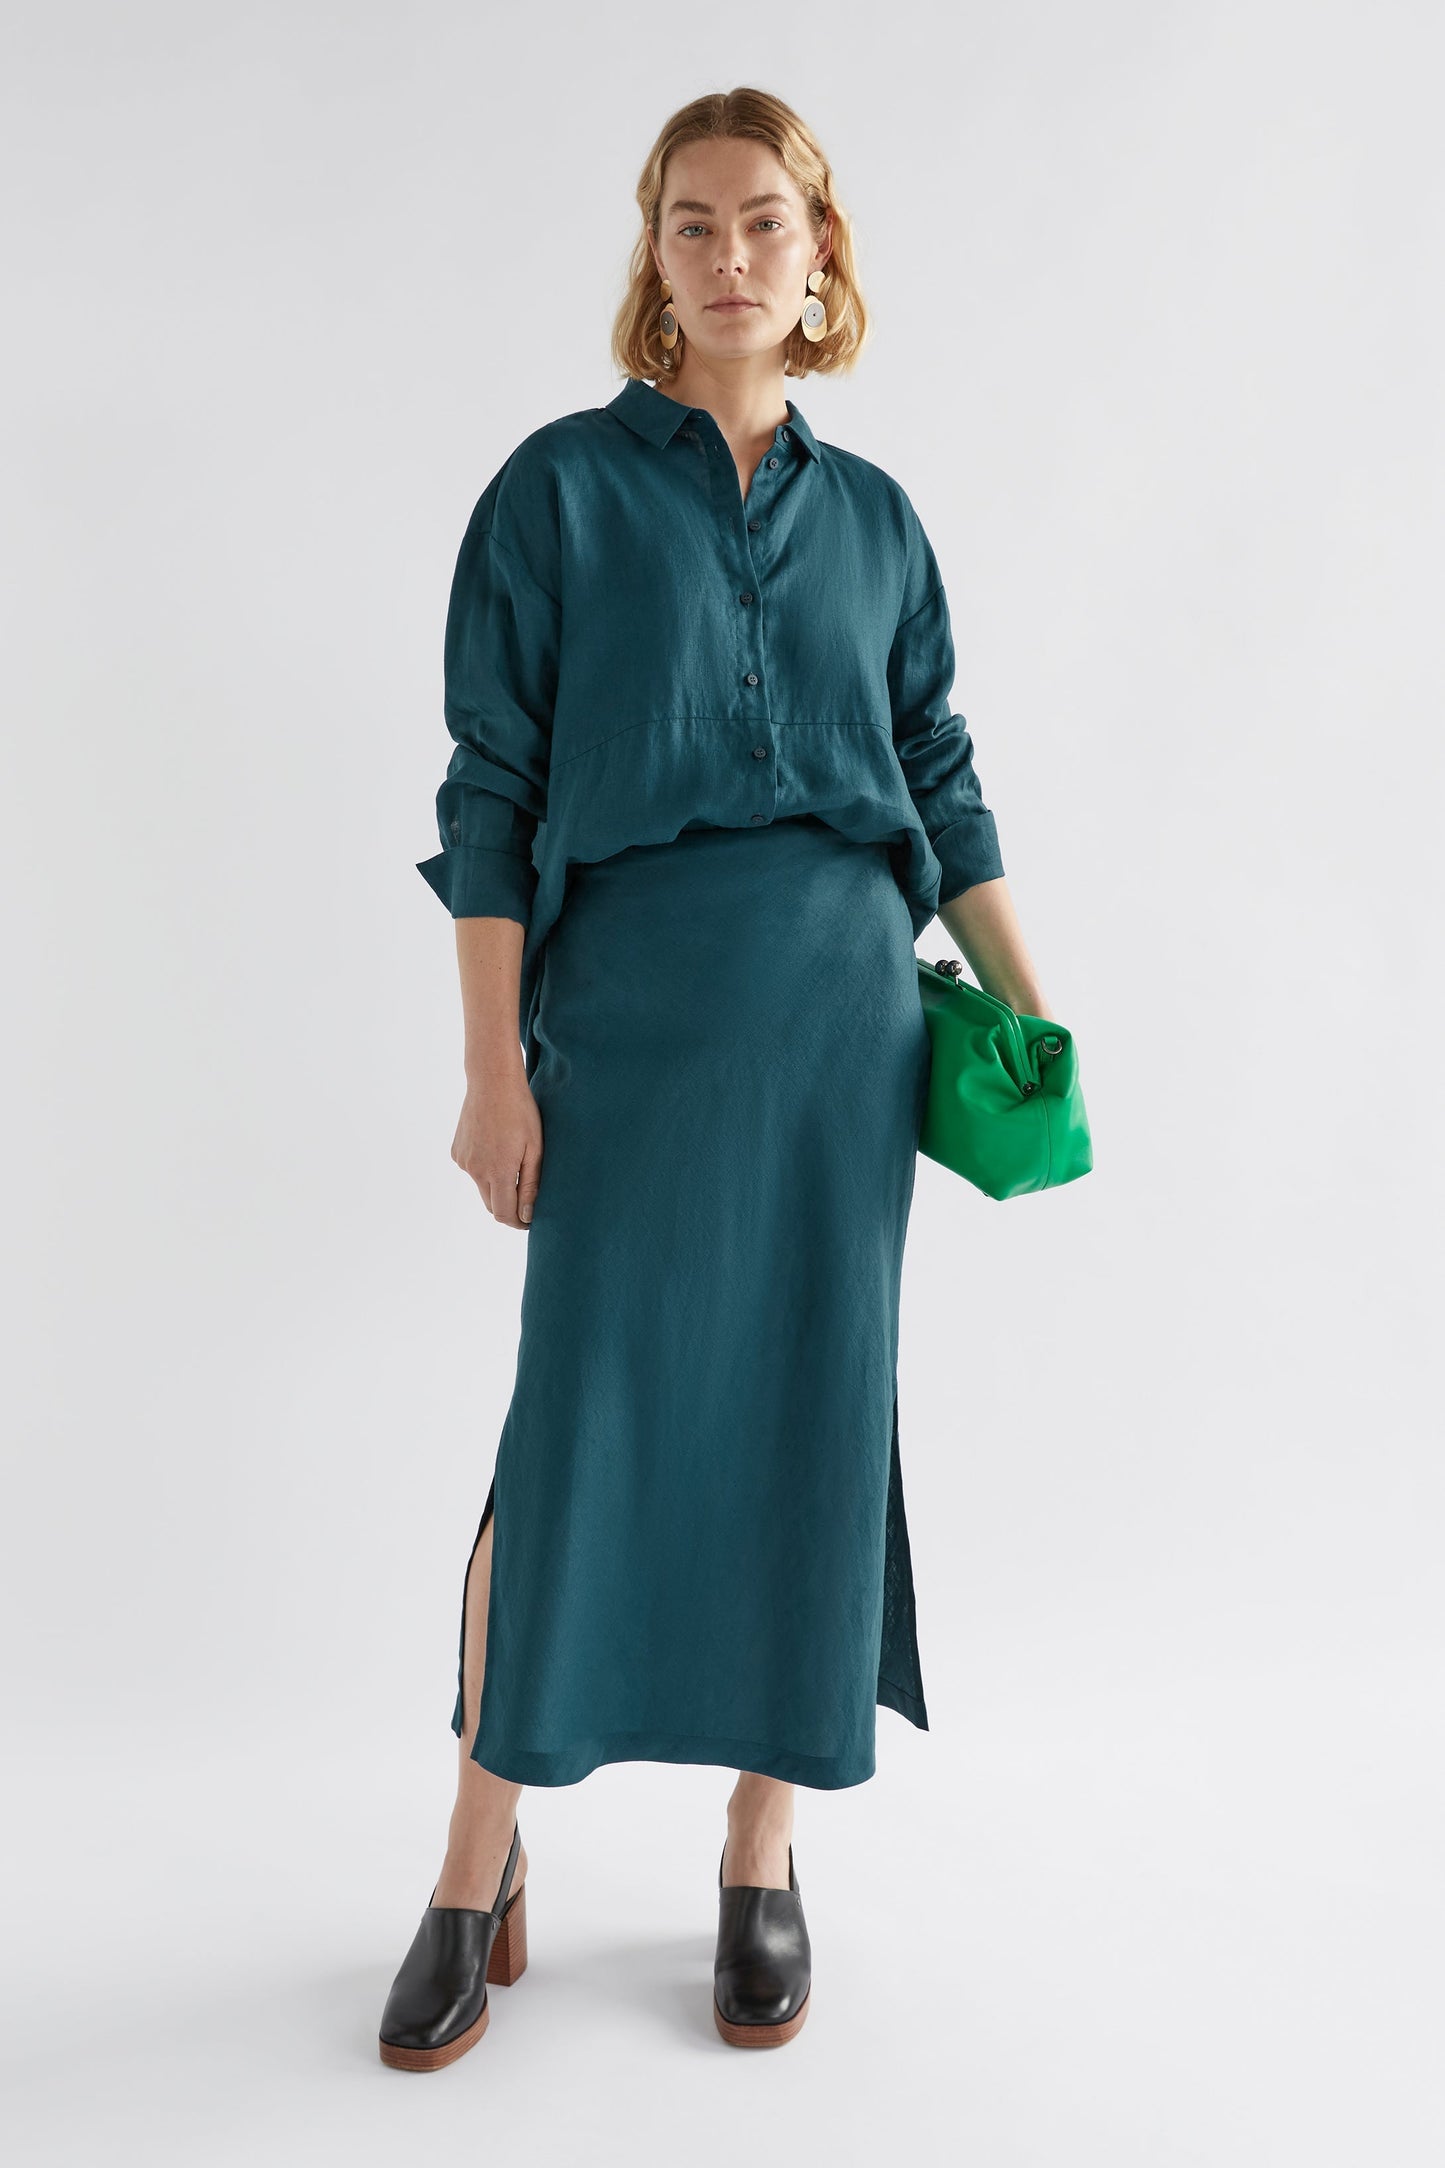 Stilla Linen Shirt with High-Low Hem and Back Pleat Detail Model front full body | PEACOCK